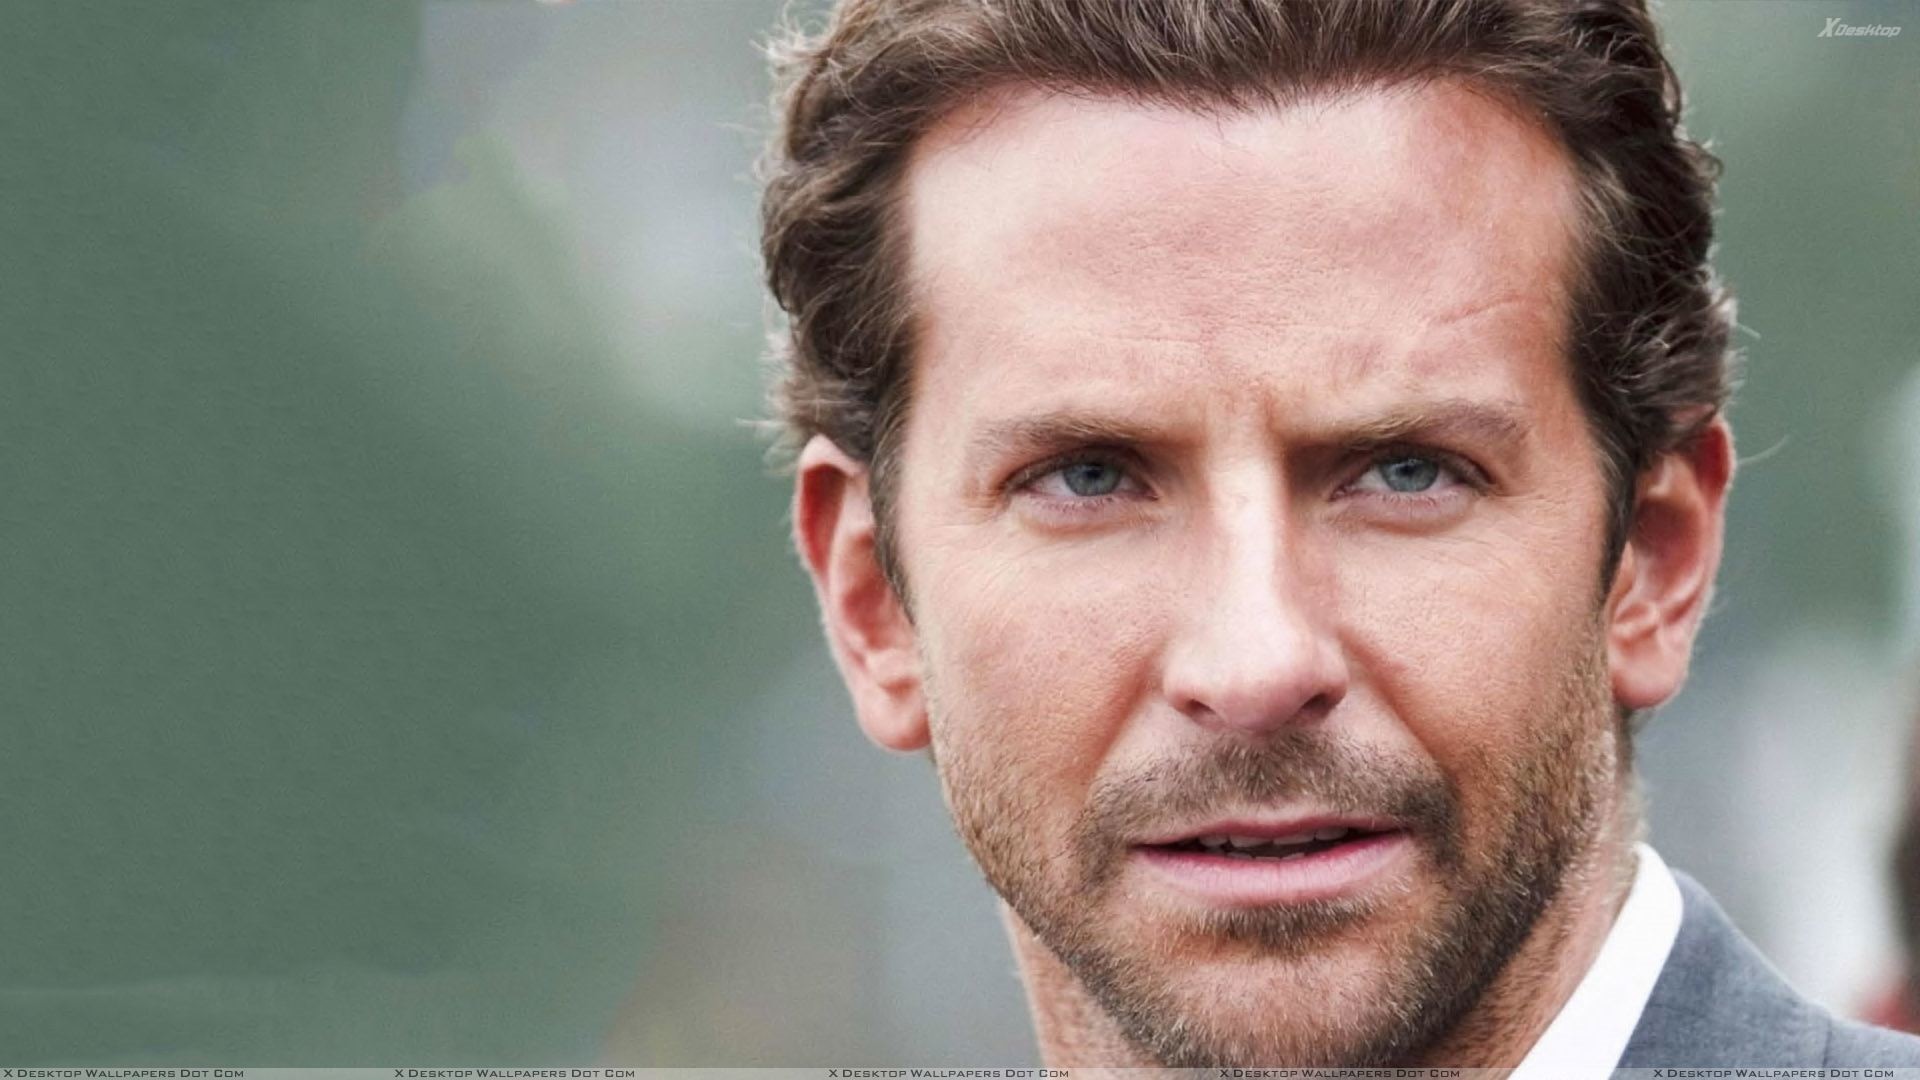 1920x1080 You are viewing wallpaper titled "Bradley Cooper ...